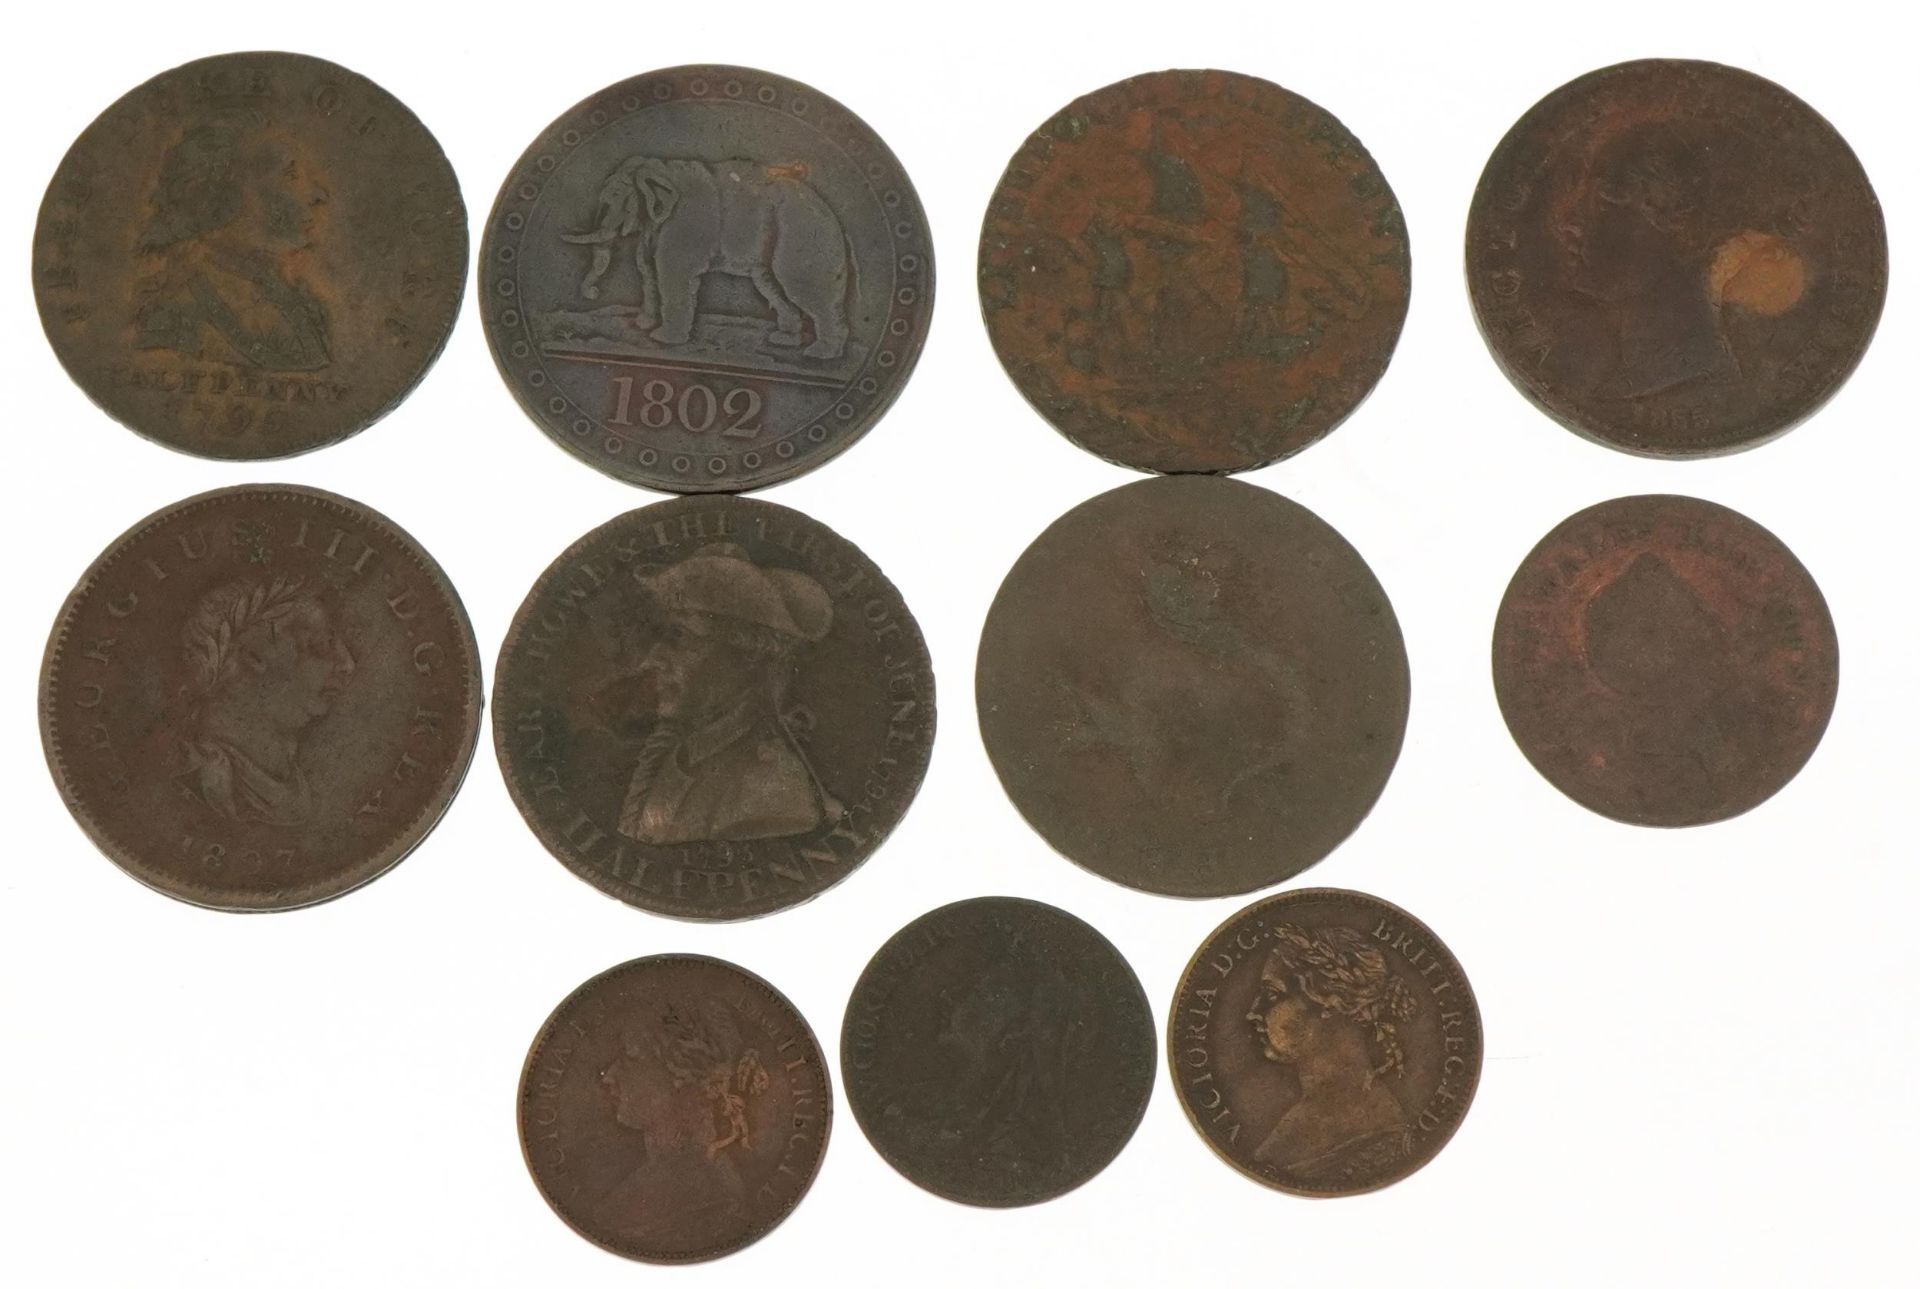 Antique coinage and tokens including Liverpool halfpenny and Earl Howe and The First of June 1984